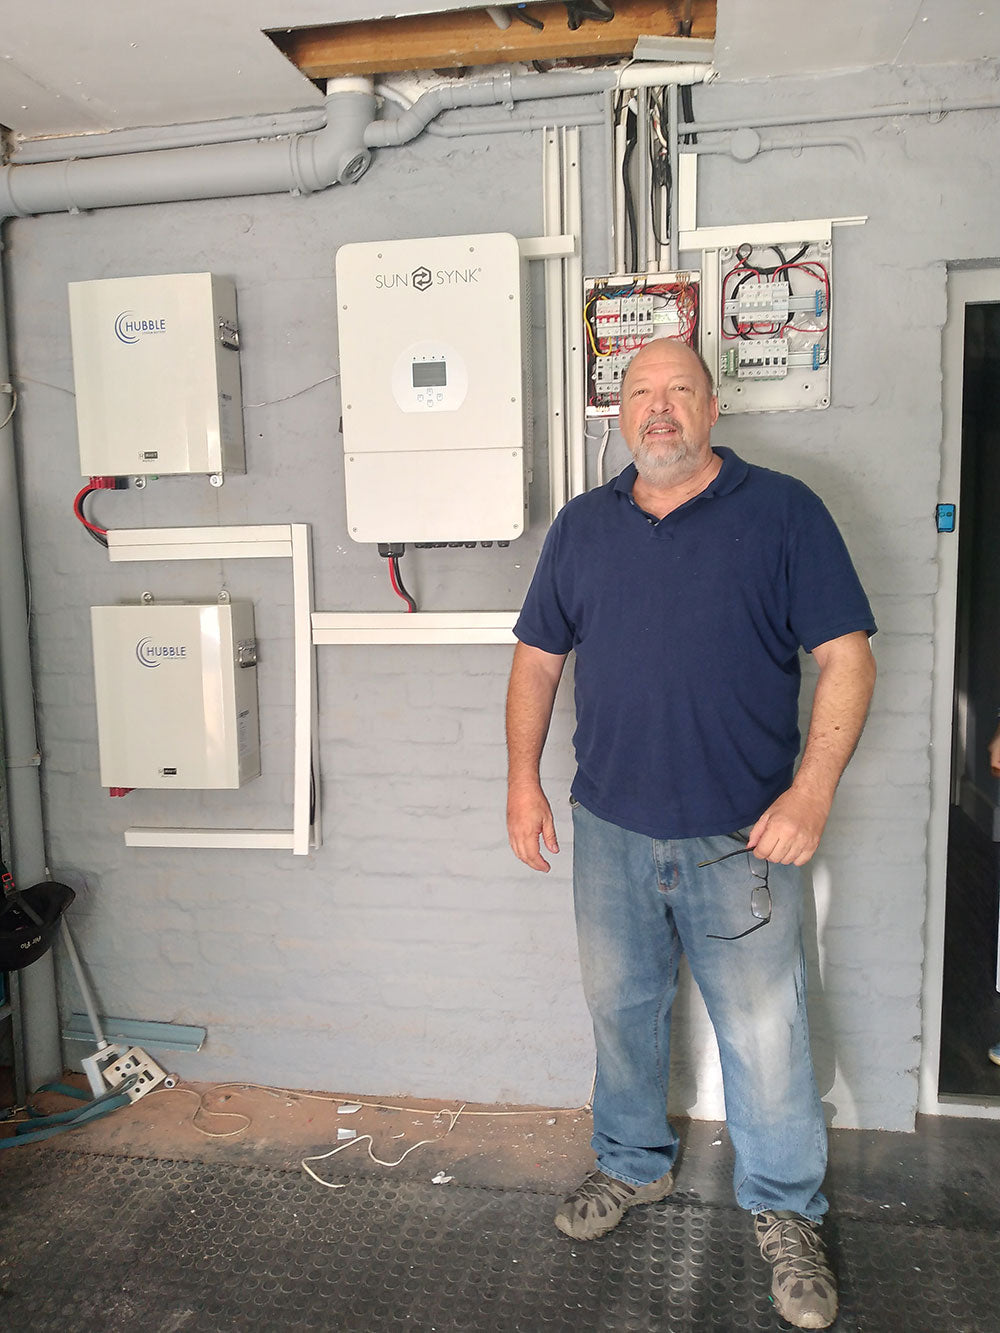 Sunsynk 8kW 1 Phase Hybrid Inverter - City of Cape Town Approved